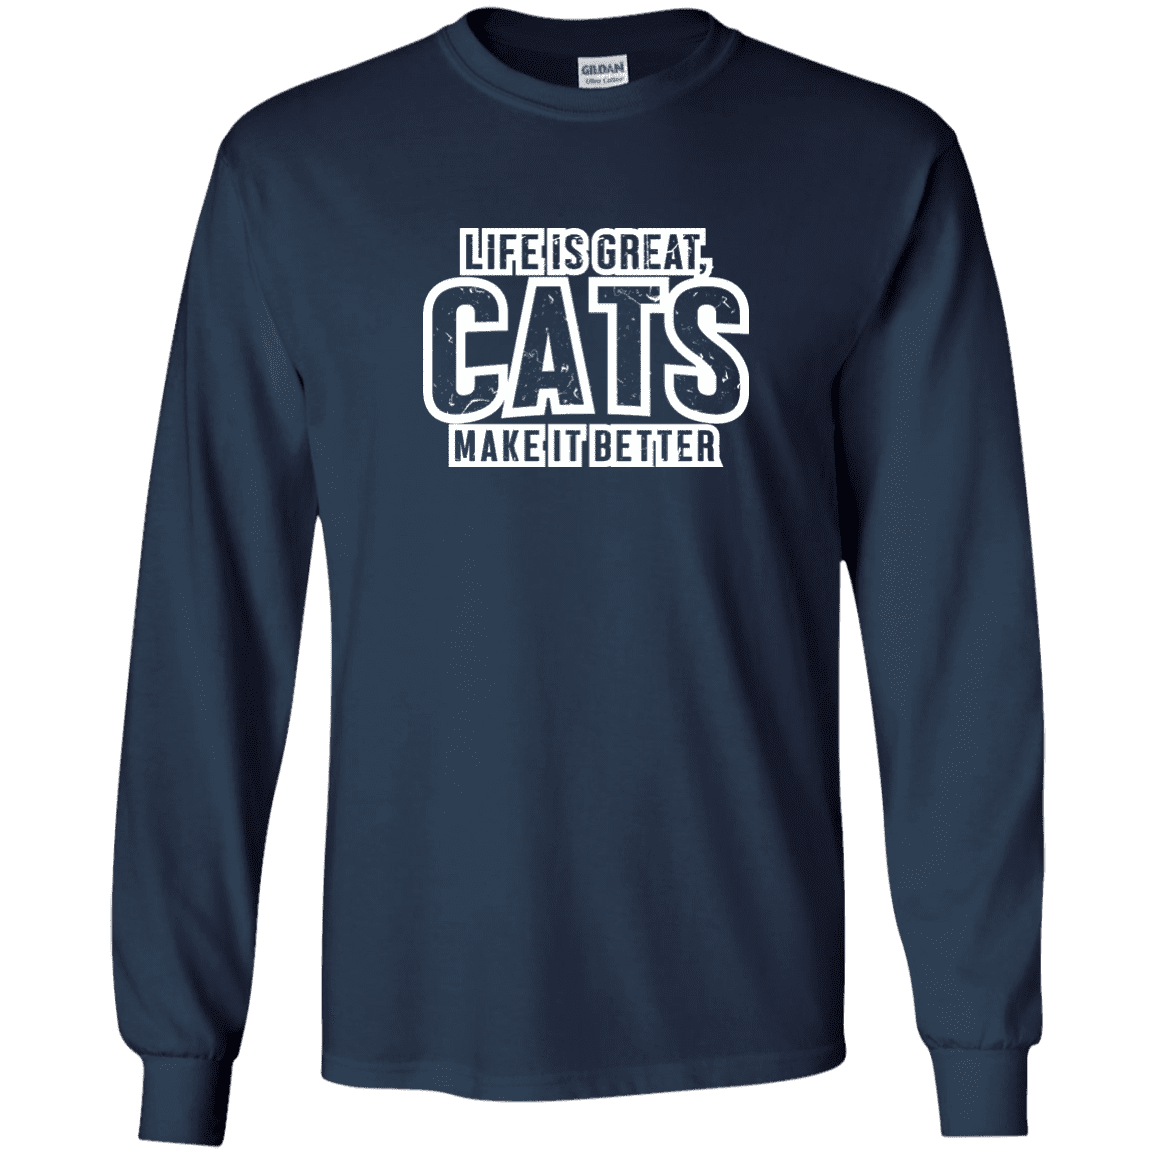 Life Is Great Cats - Long Sleeve T Shirt.